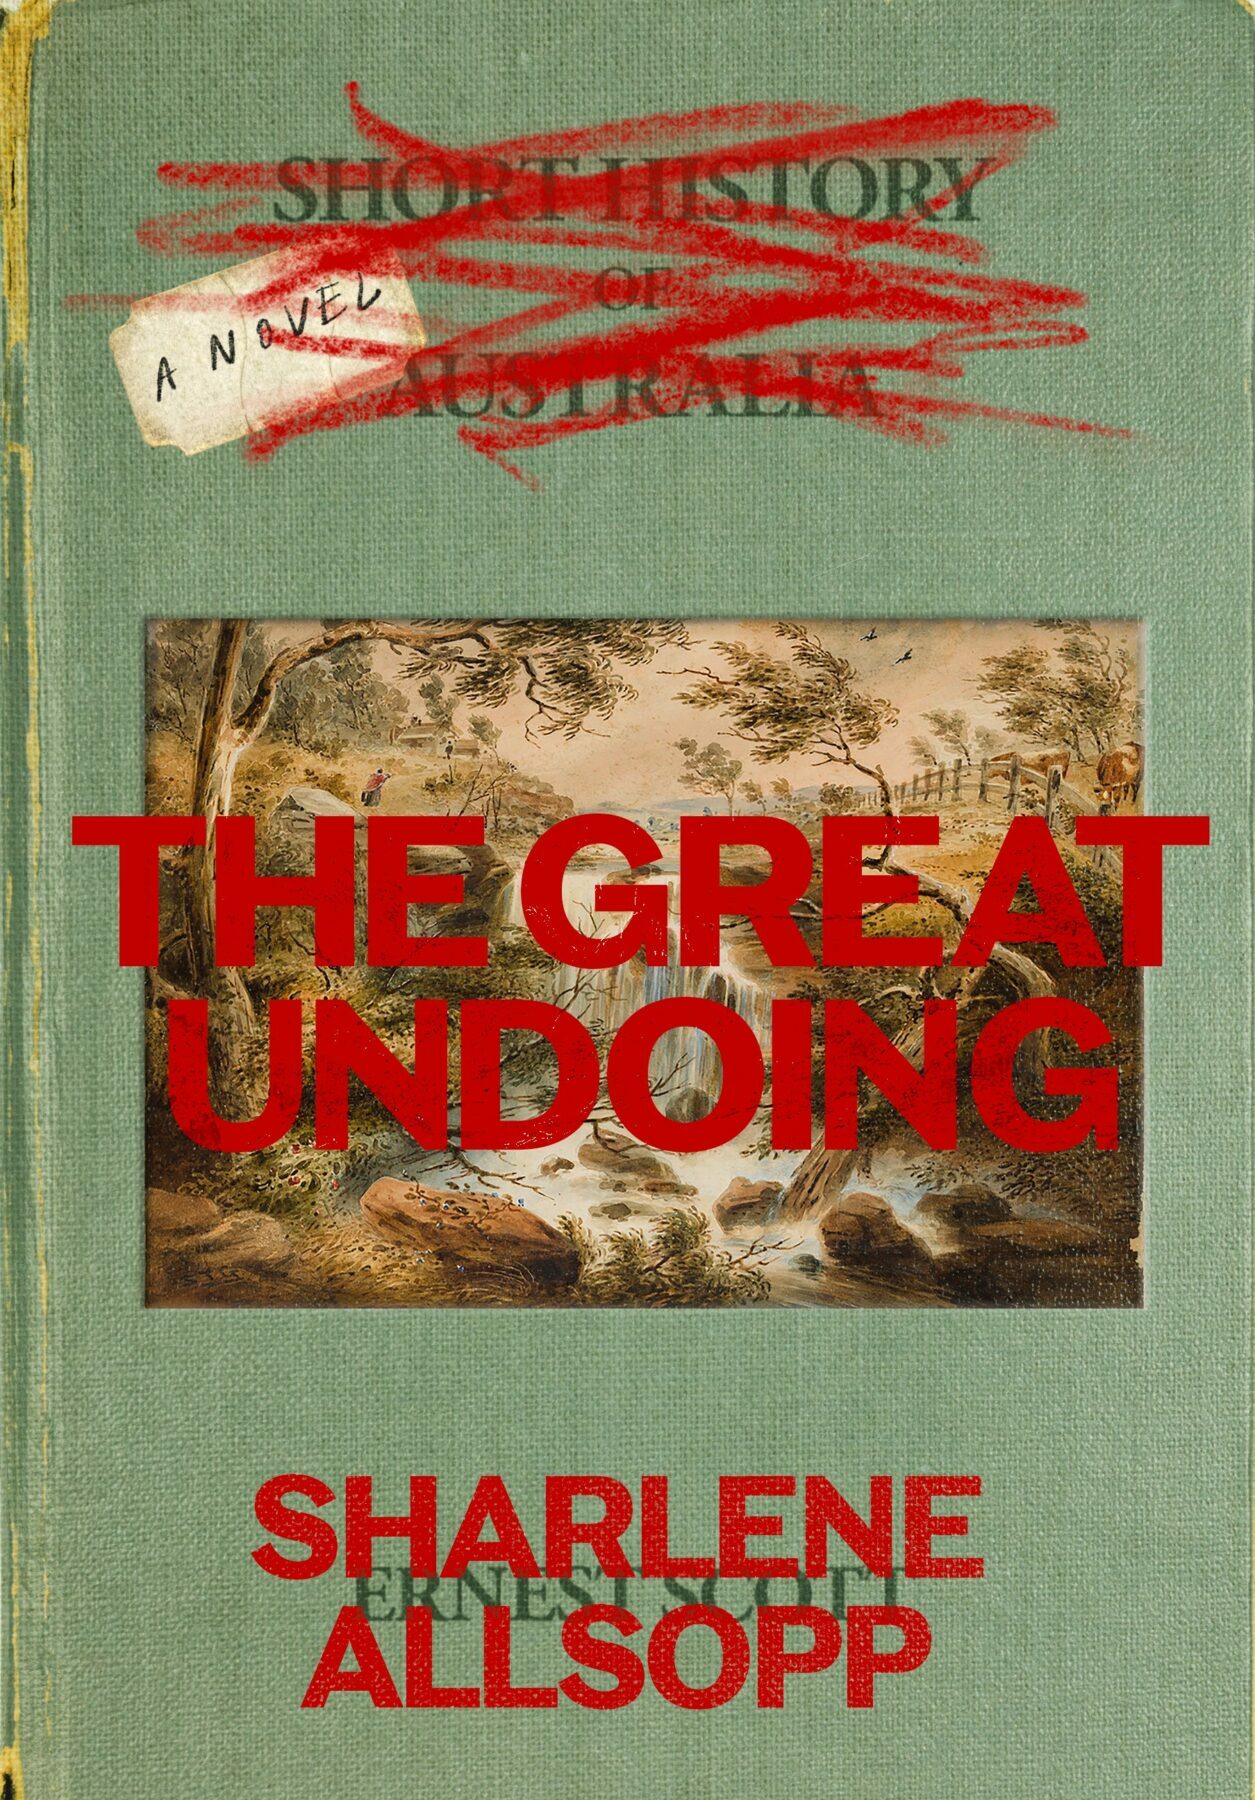 A green book cover with an image of a waterfall and trees in the centre, and the title over the top in red. There is a scribble of red over black text at the top of the page, and the author's name at the bottom